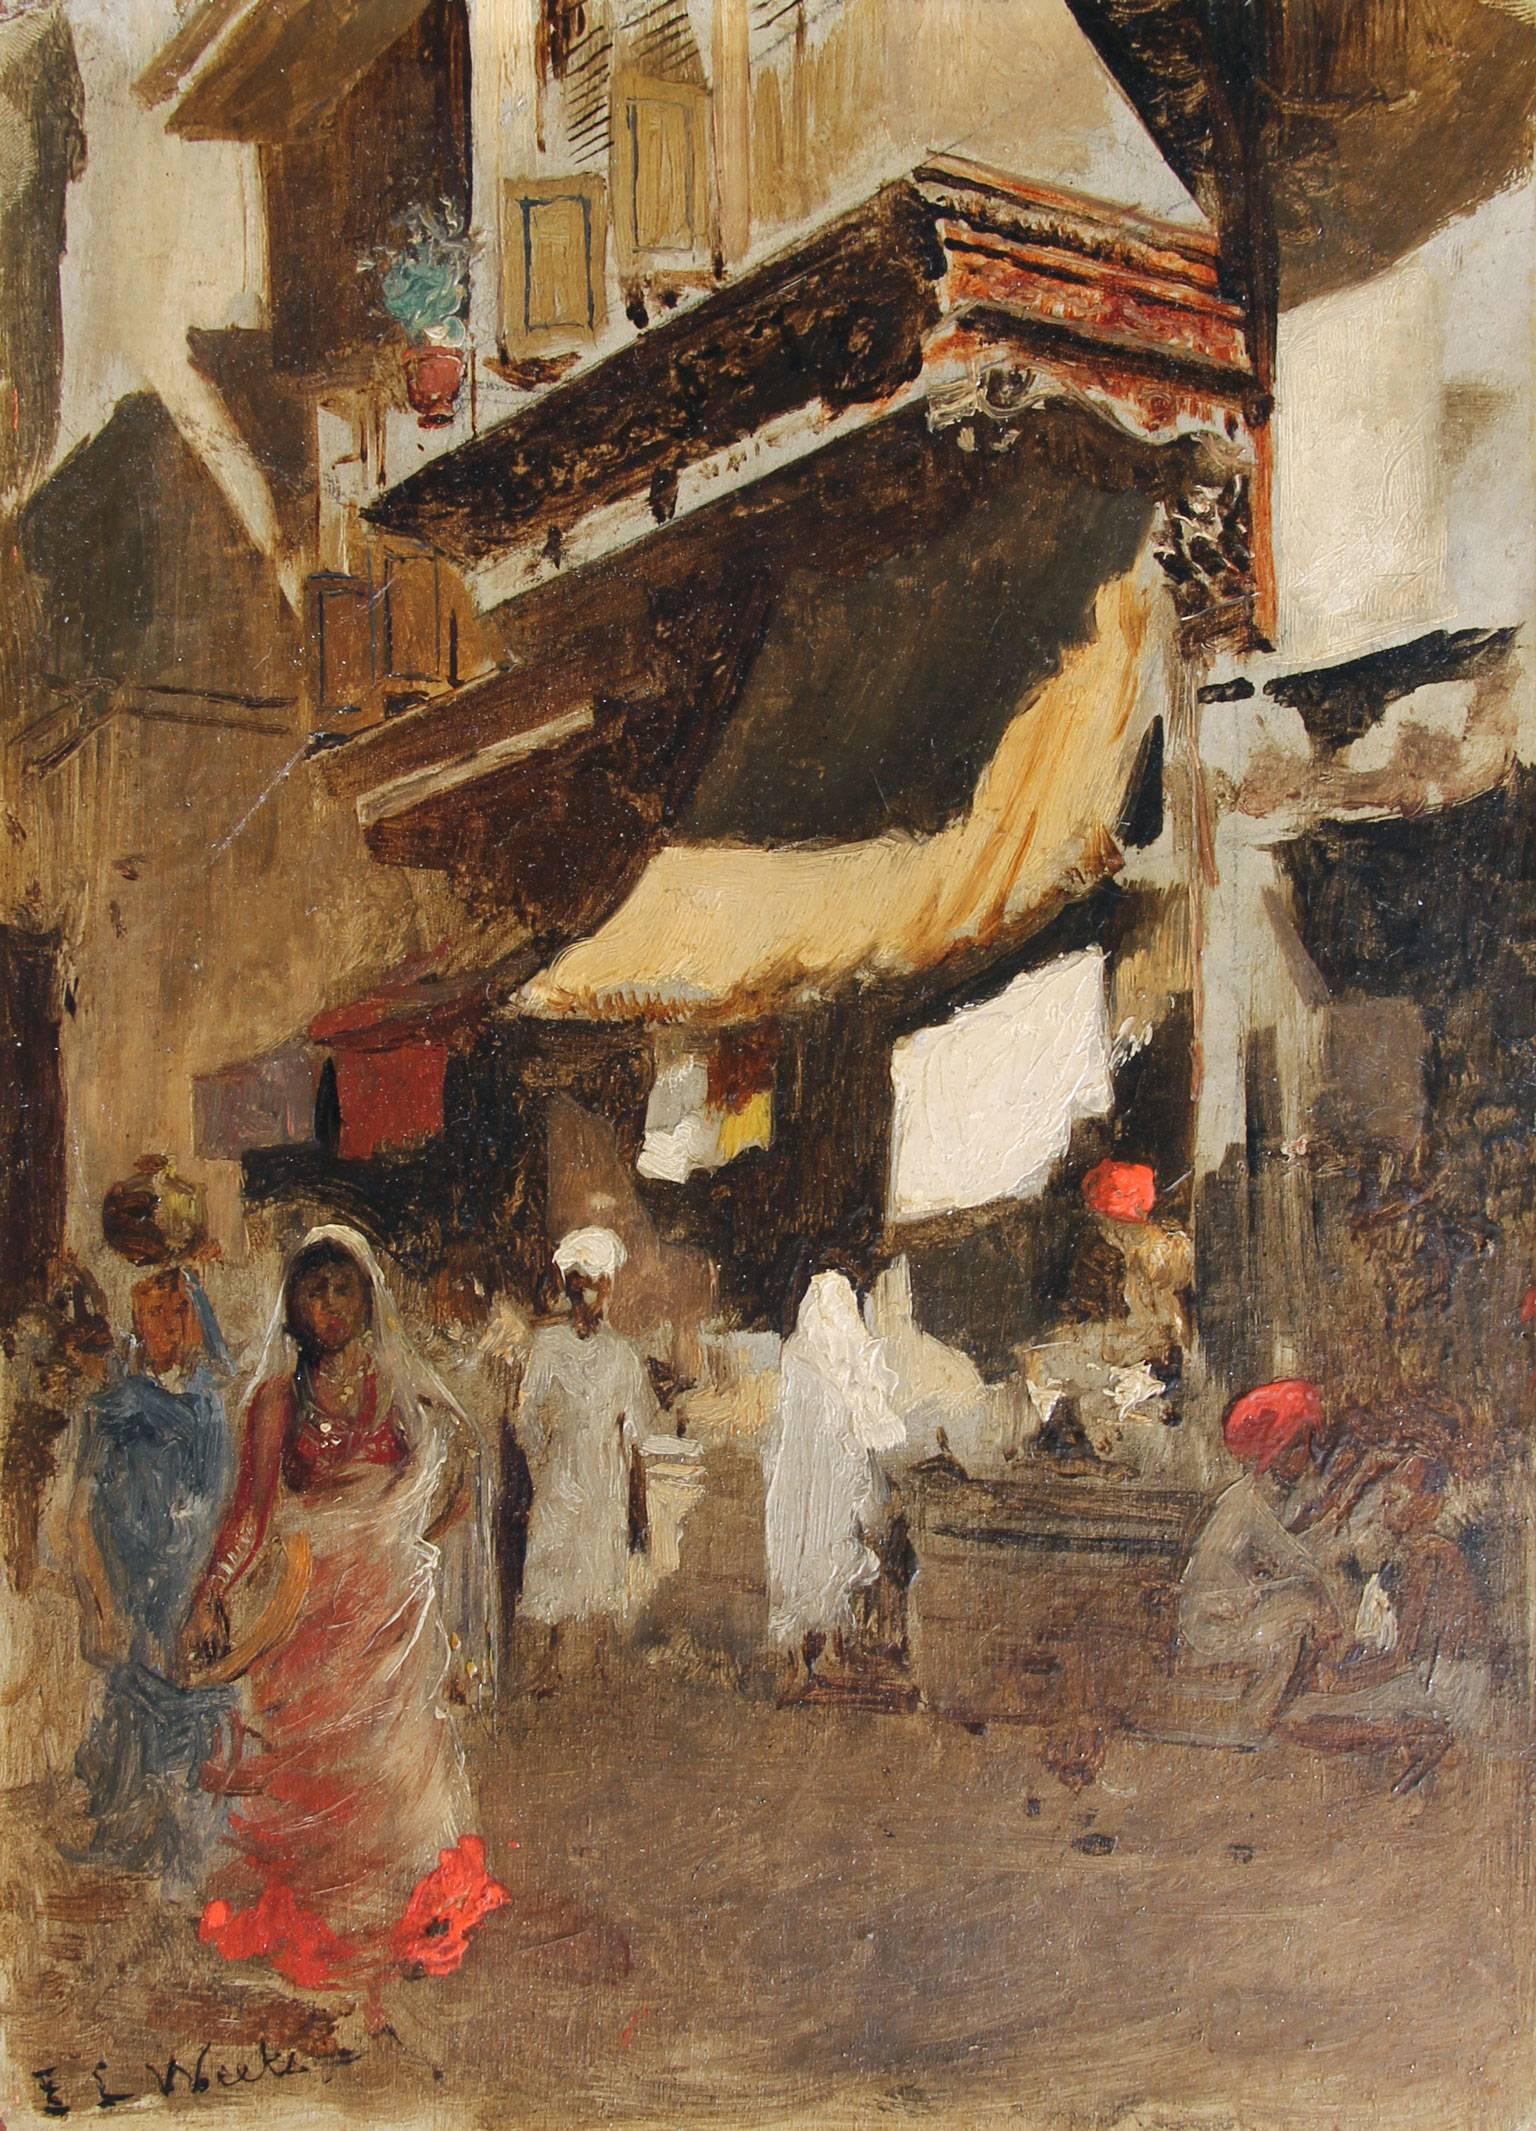 EDWIN LORD WEEKS
American, 1849–1903

Street Scene in Bombay

Signed E.L. Weeks, also inscribed on the reverse Please return to E.L. Weeks/ 128 Av. de Wagram, Paris
Oil on board
8¾ x 6¼ inches (22 x 16 cm)
Framed: 14¾ x 12½ (37.5 x 32 cm)

This work